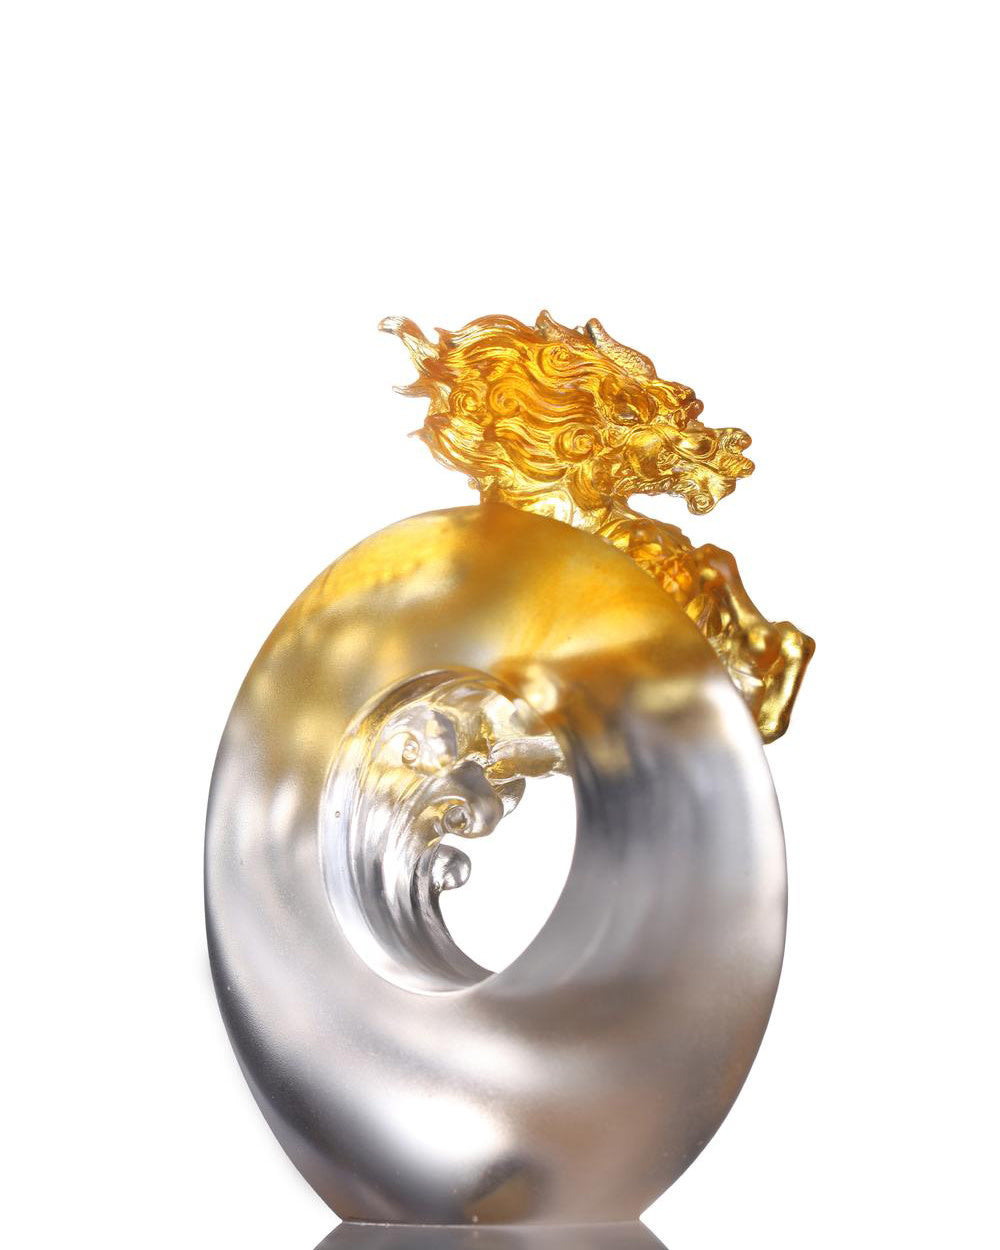 LIULI Crystal Art Crystal Qilin, the mythical creature - "Beauty" in Light Amber